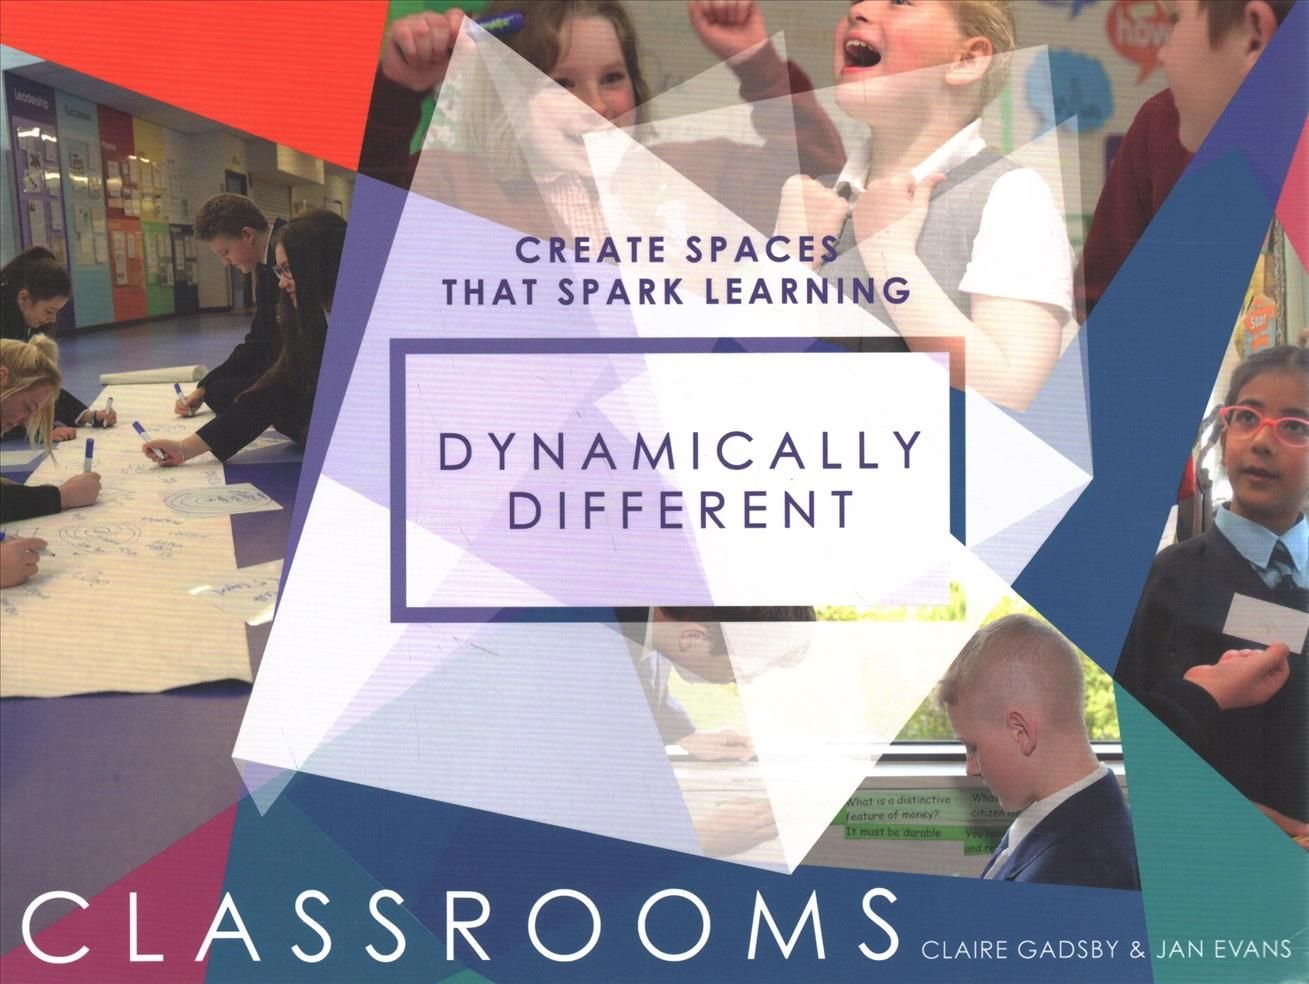 Dynamically Different Classrooms